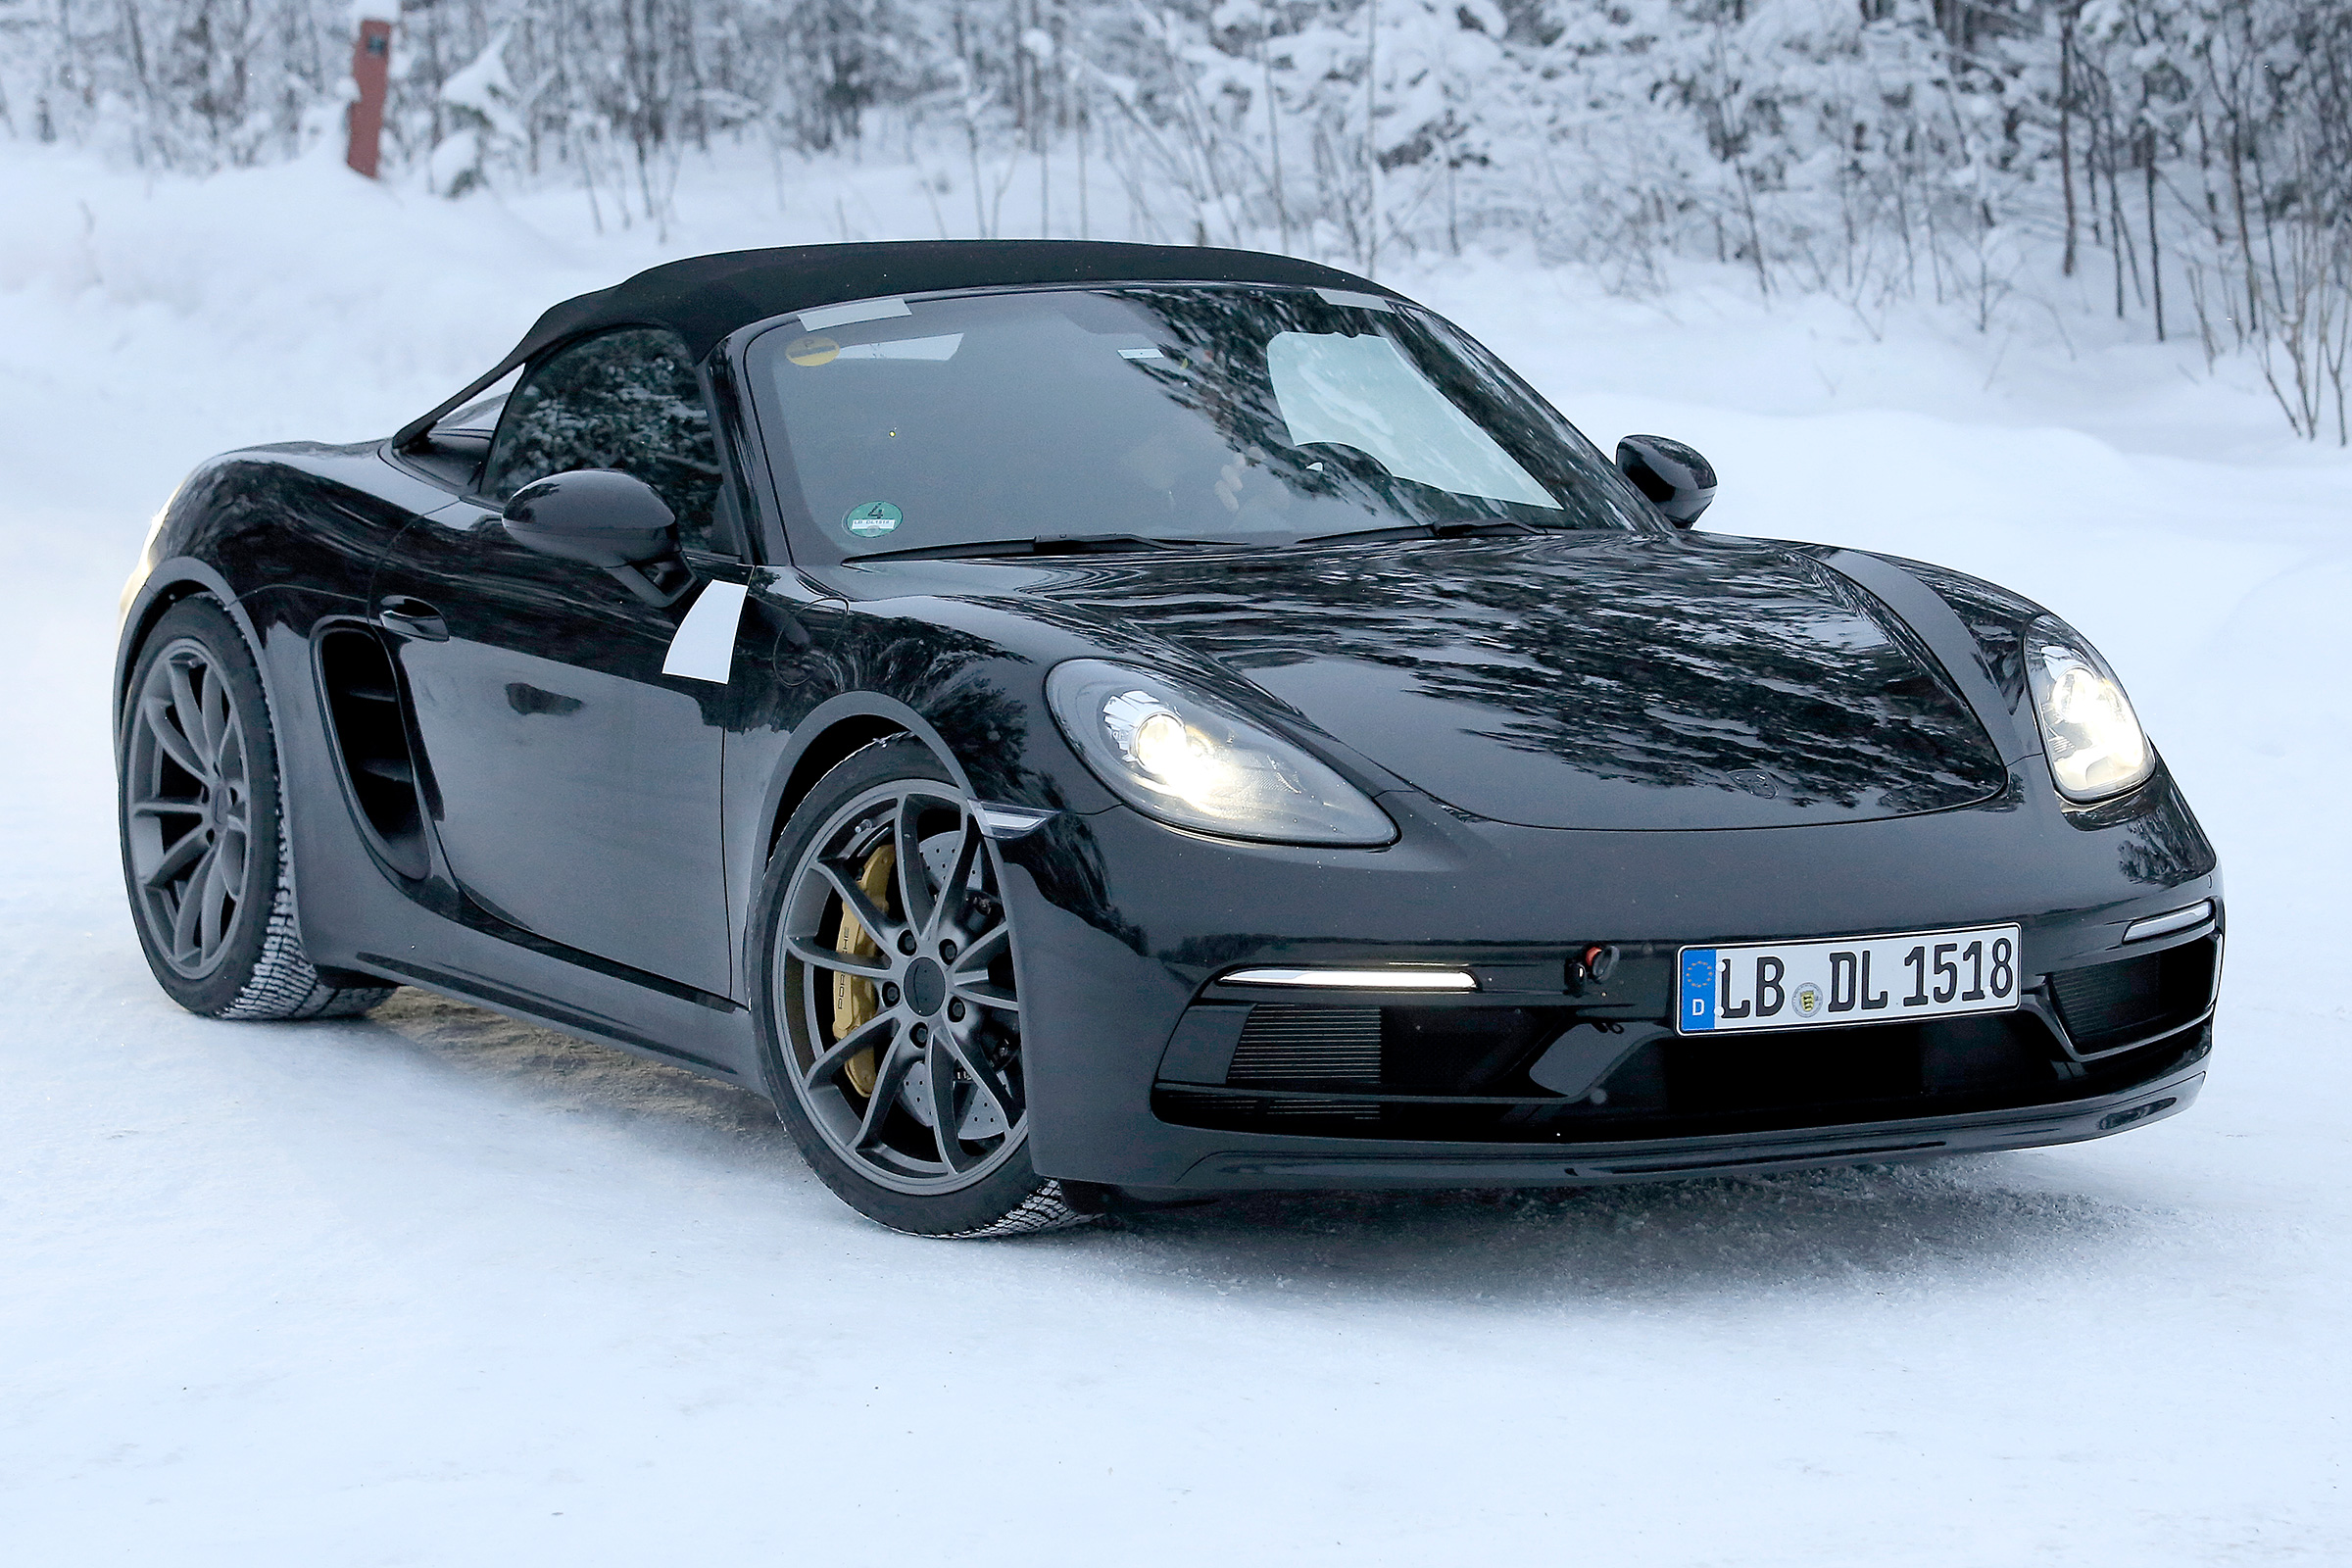 Porsche Boxster 718 Spyder spied winter testing ahead of 2019 reveal ...